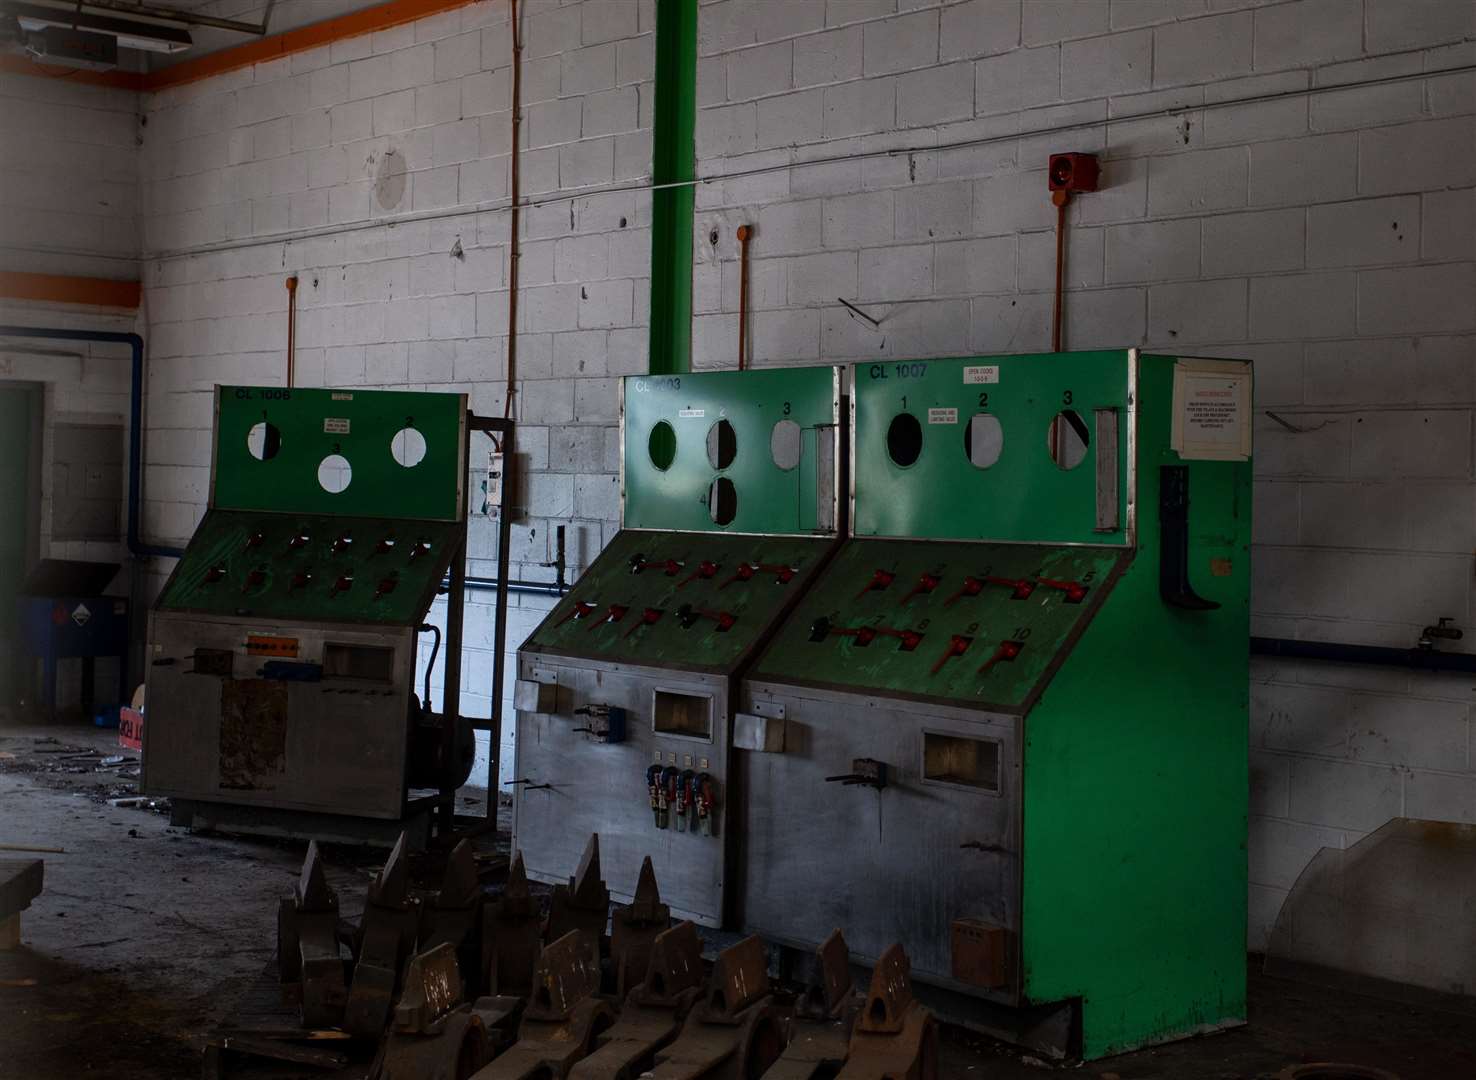 Some machinery remains from the site's heyday such as these air brake testers